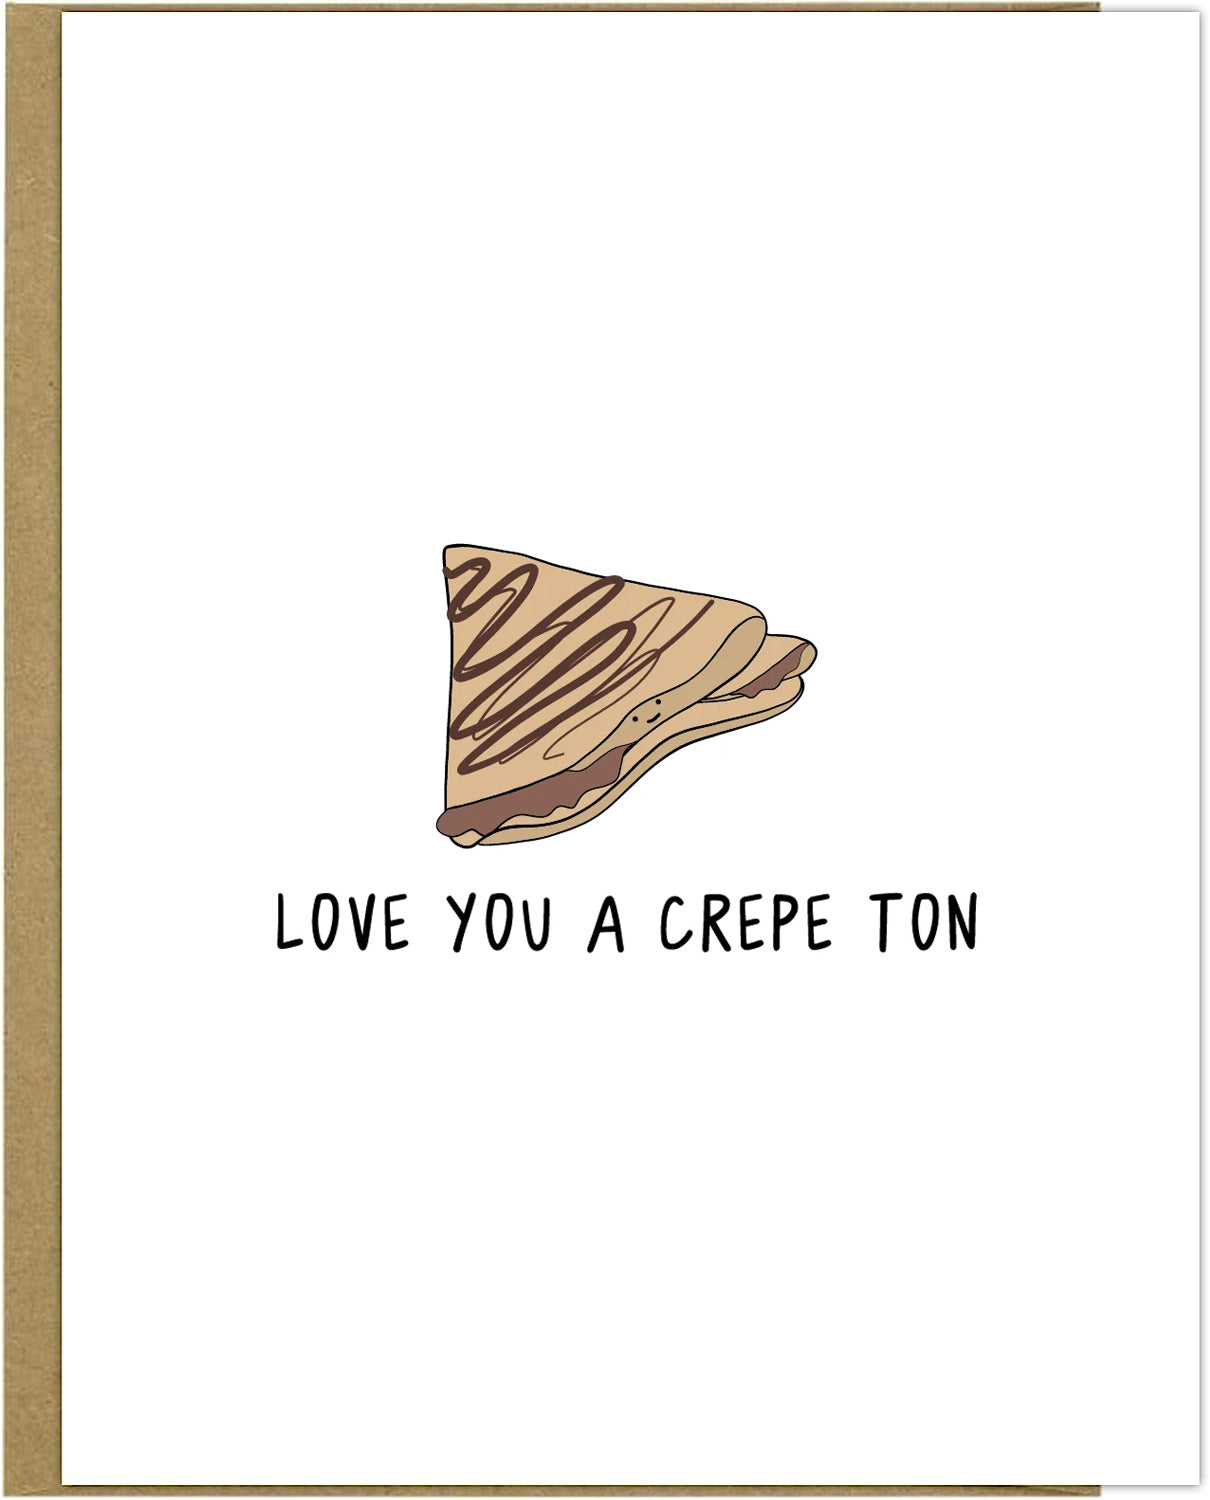 Love you a rockdoodles Crepe Ton greeting card enveloped in creativity.